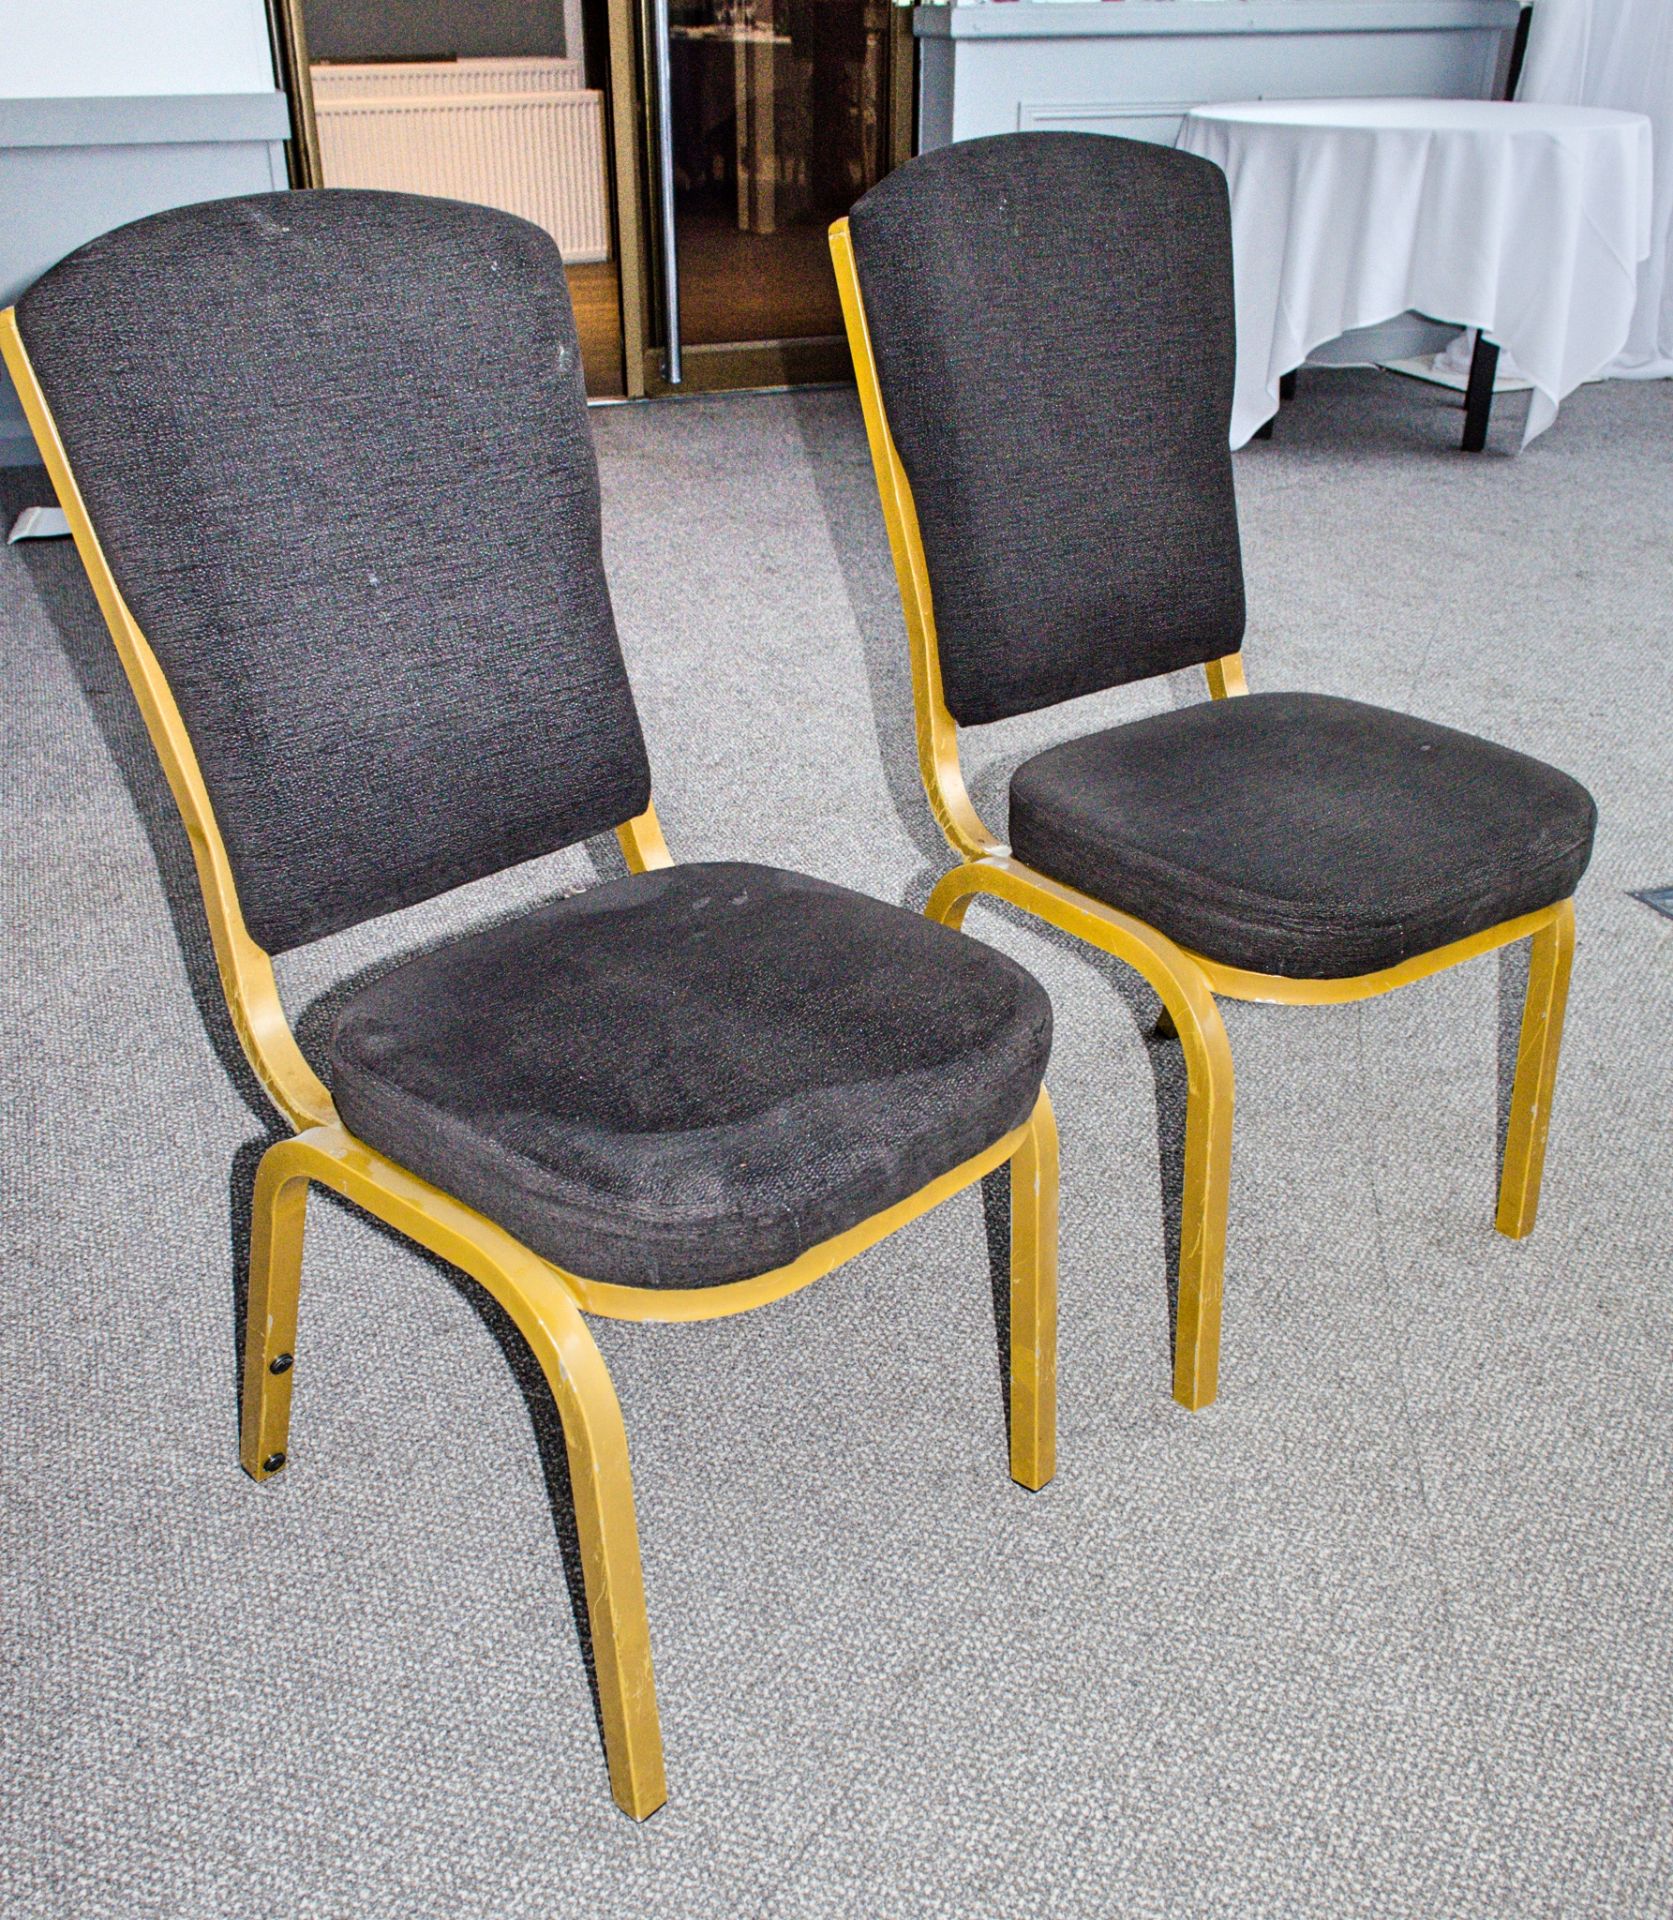 60 - banqueting stand chairs ** Photos for reference purpose ** ** No VAT on hammer price but VAT